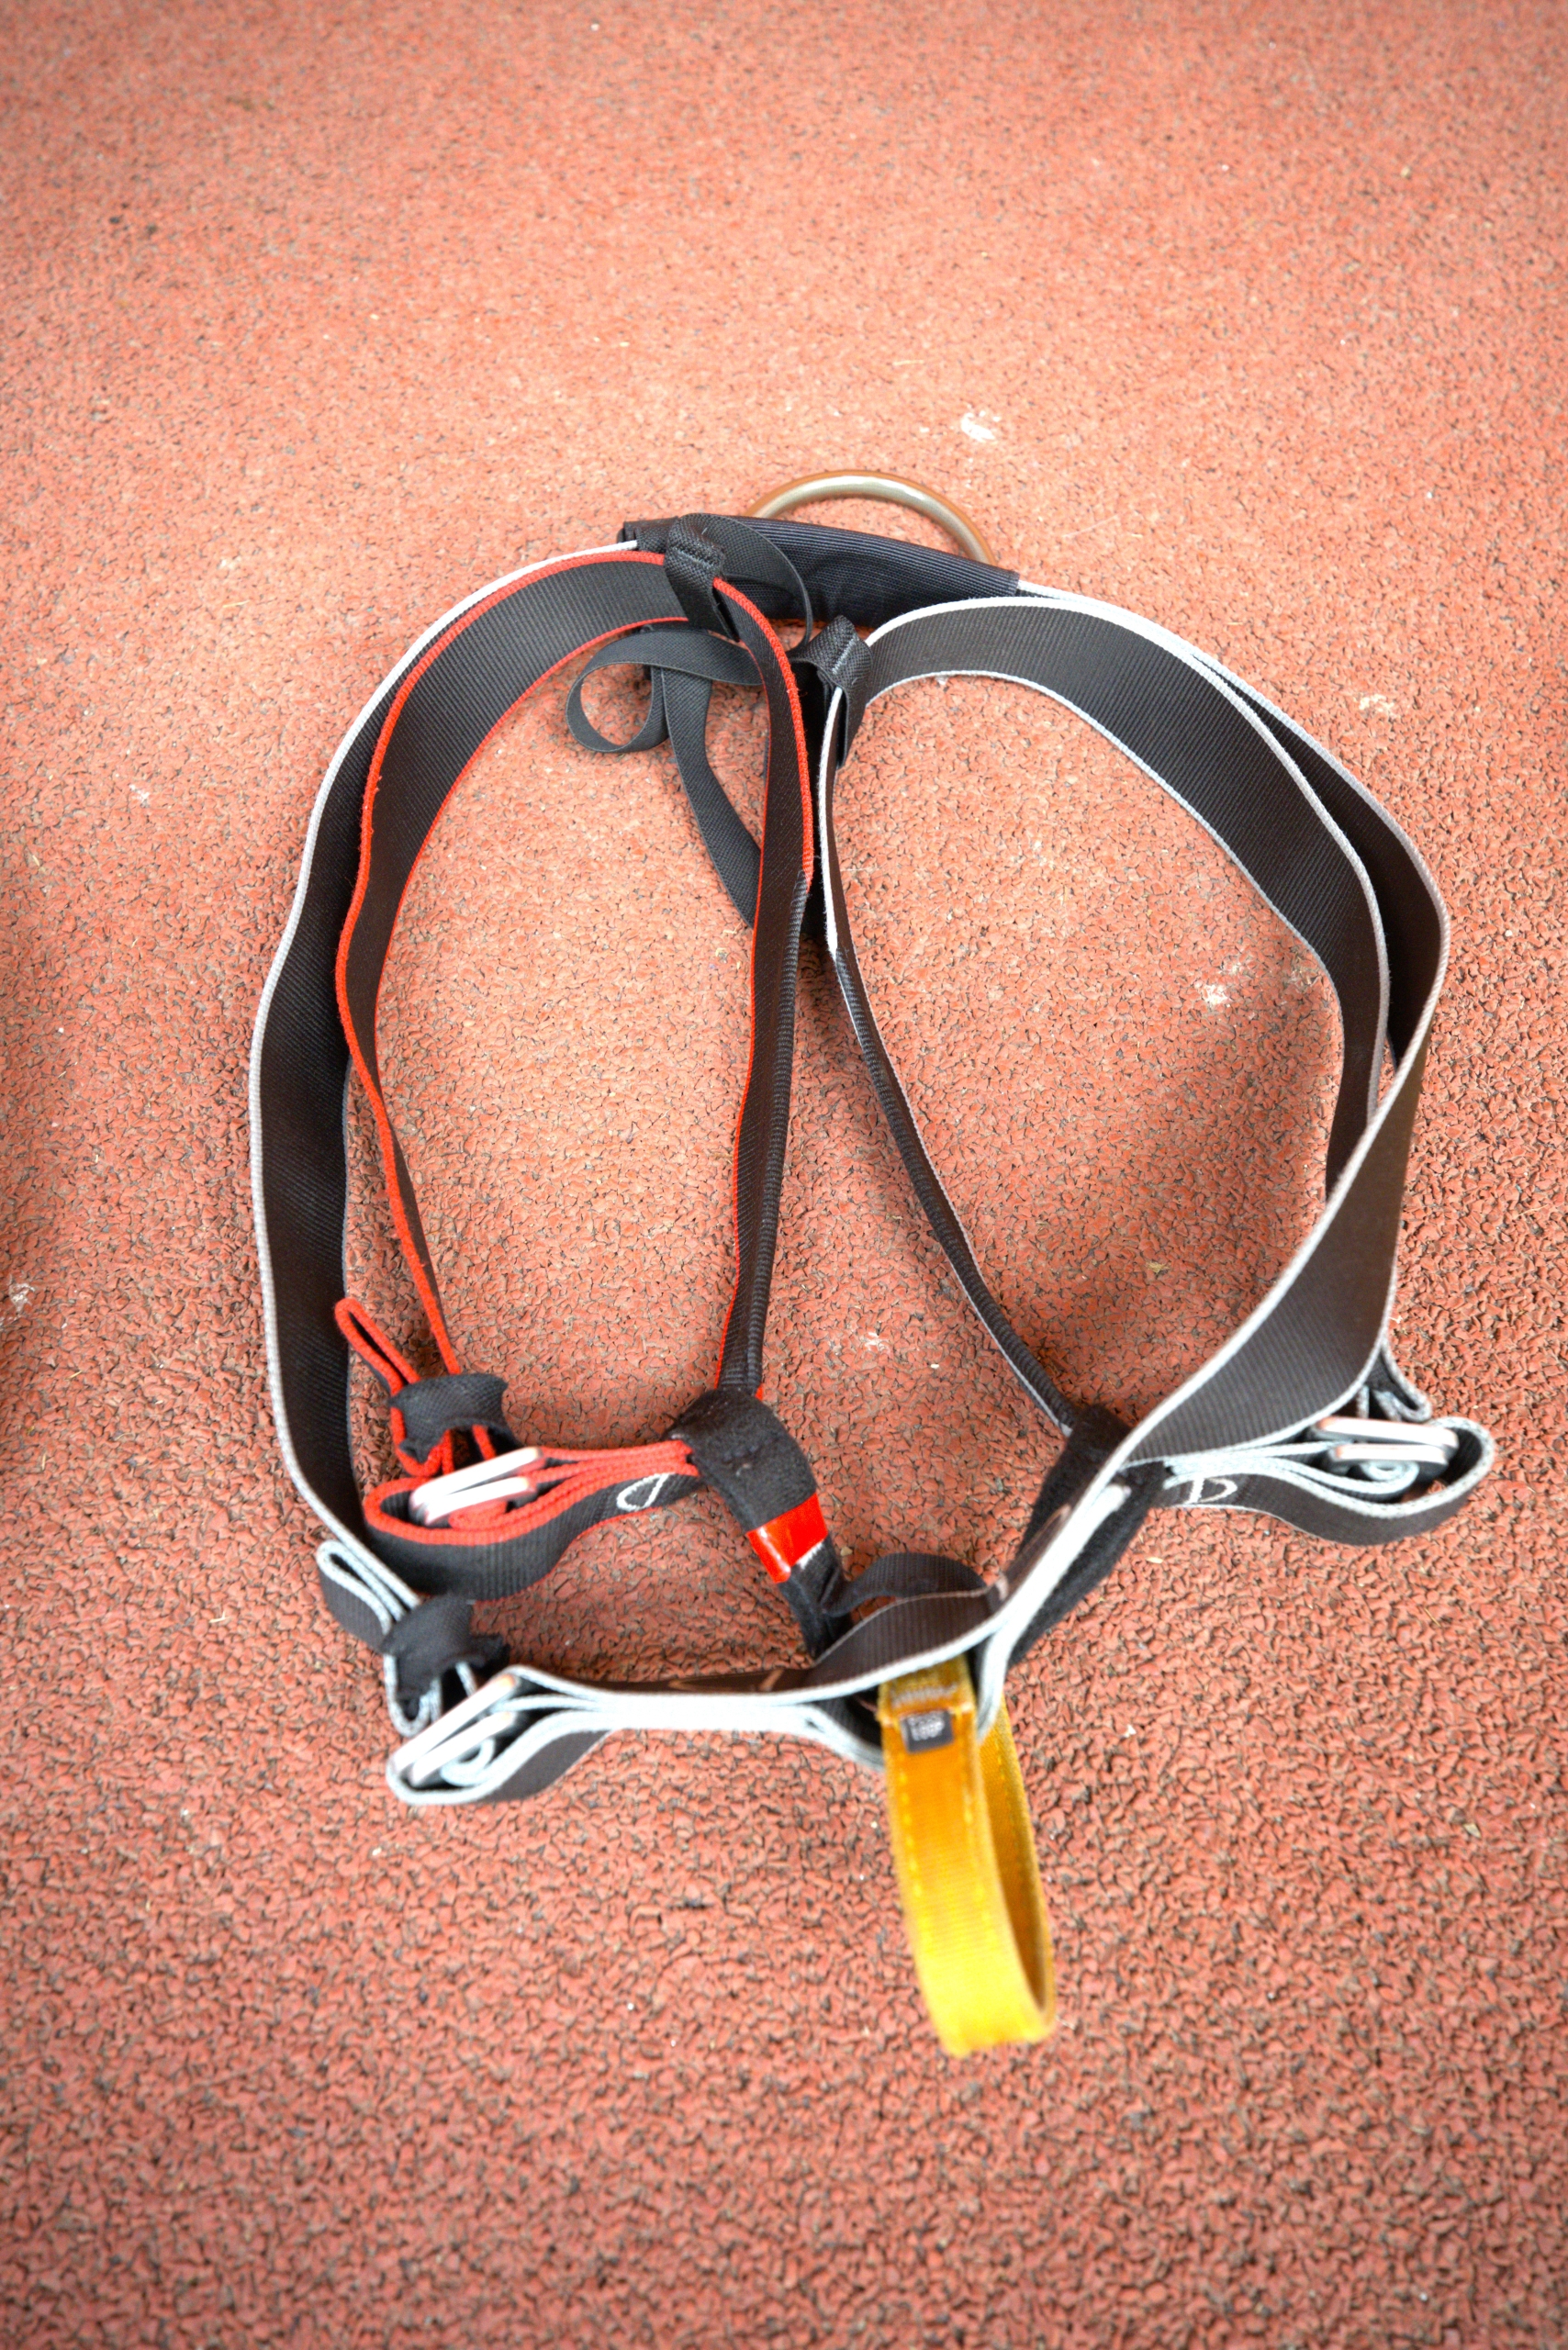 A red, white, black and yellow harness lying on the floor ready to put on.